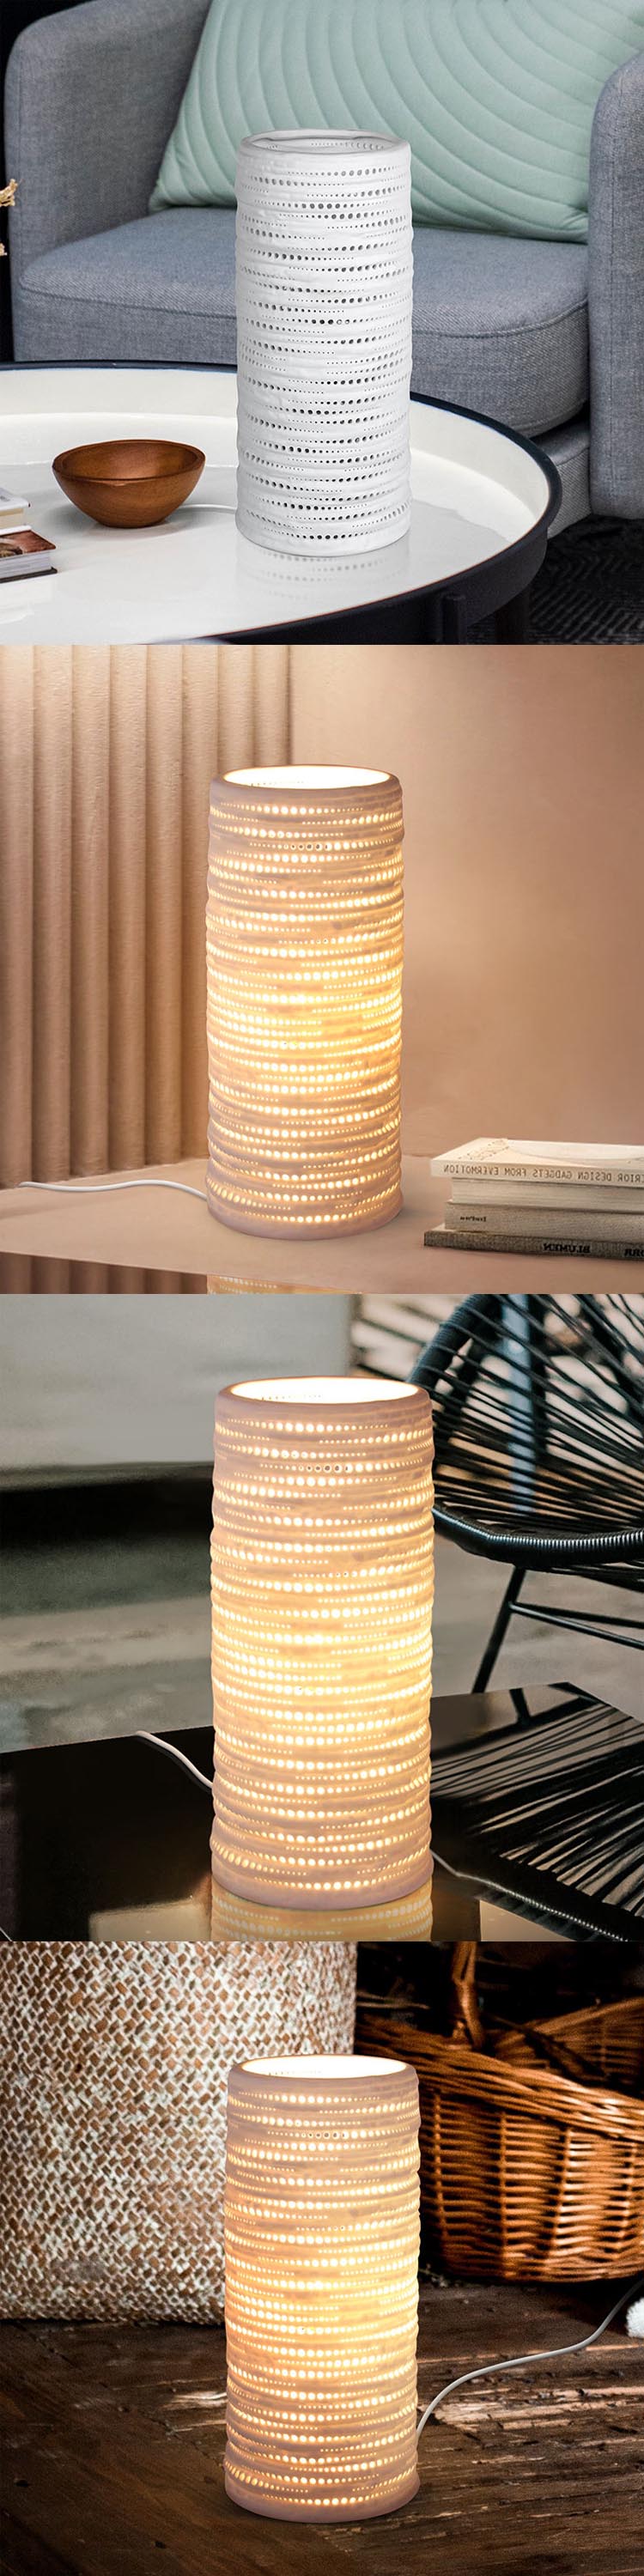 Newest cylinder porcelain led light Indoor lighting bedside table lamp battery operated table night lamp